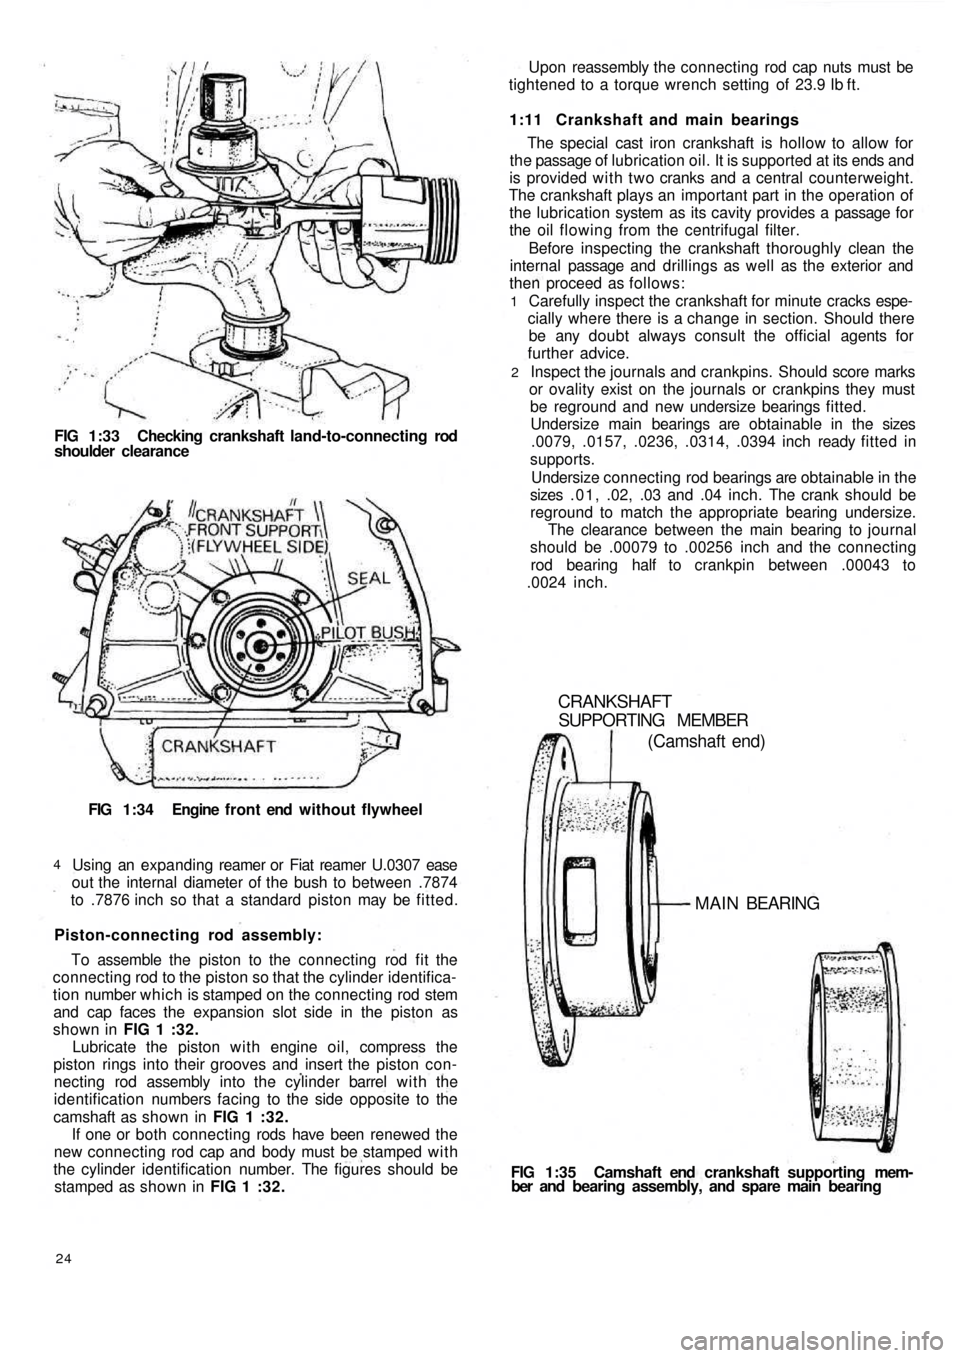 FIAT 500 1966 1.G Workshop Manual FIG 1:33 Checking crankshaft land-to-connecting rod
shoulder clearance
FIG 1:34 Engine  f r o n t  end  without flywheel
Using an expanding reamer or Fiat reamer U.0307 ease
out the internal diameter 